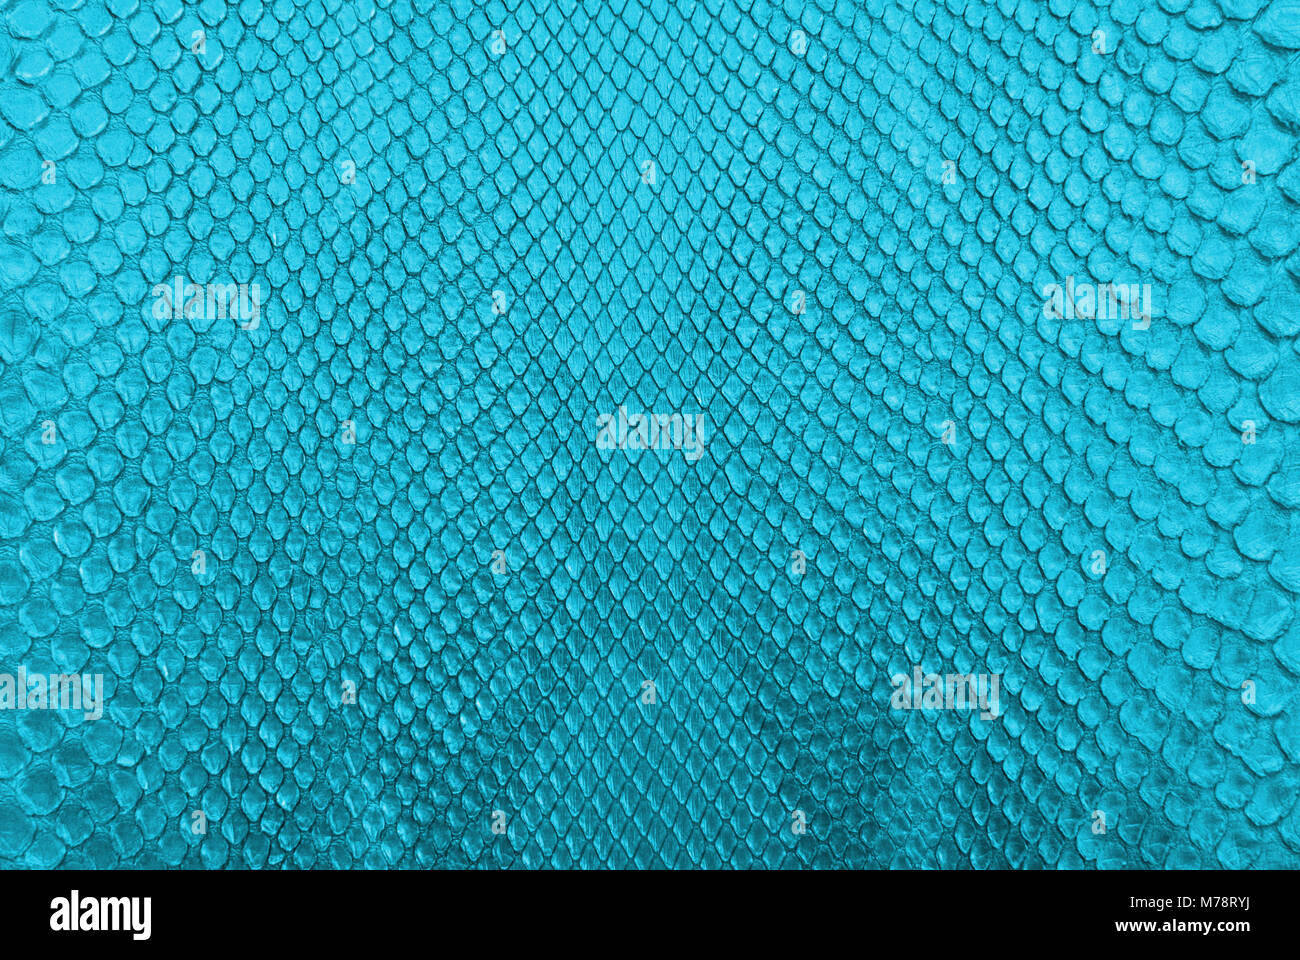 Crocodile Skin Texture High Resolution Stock Photography and Images - Alamy